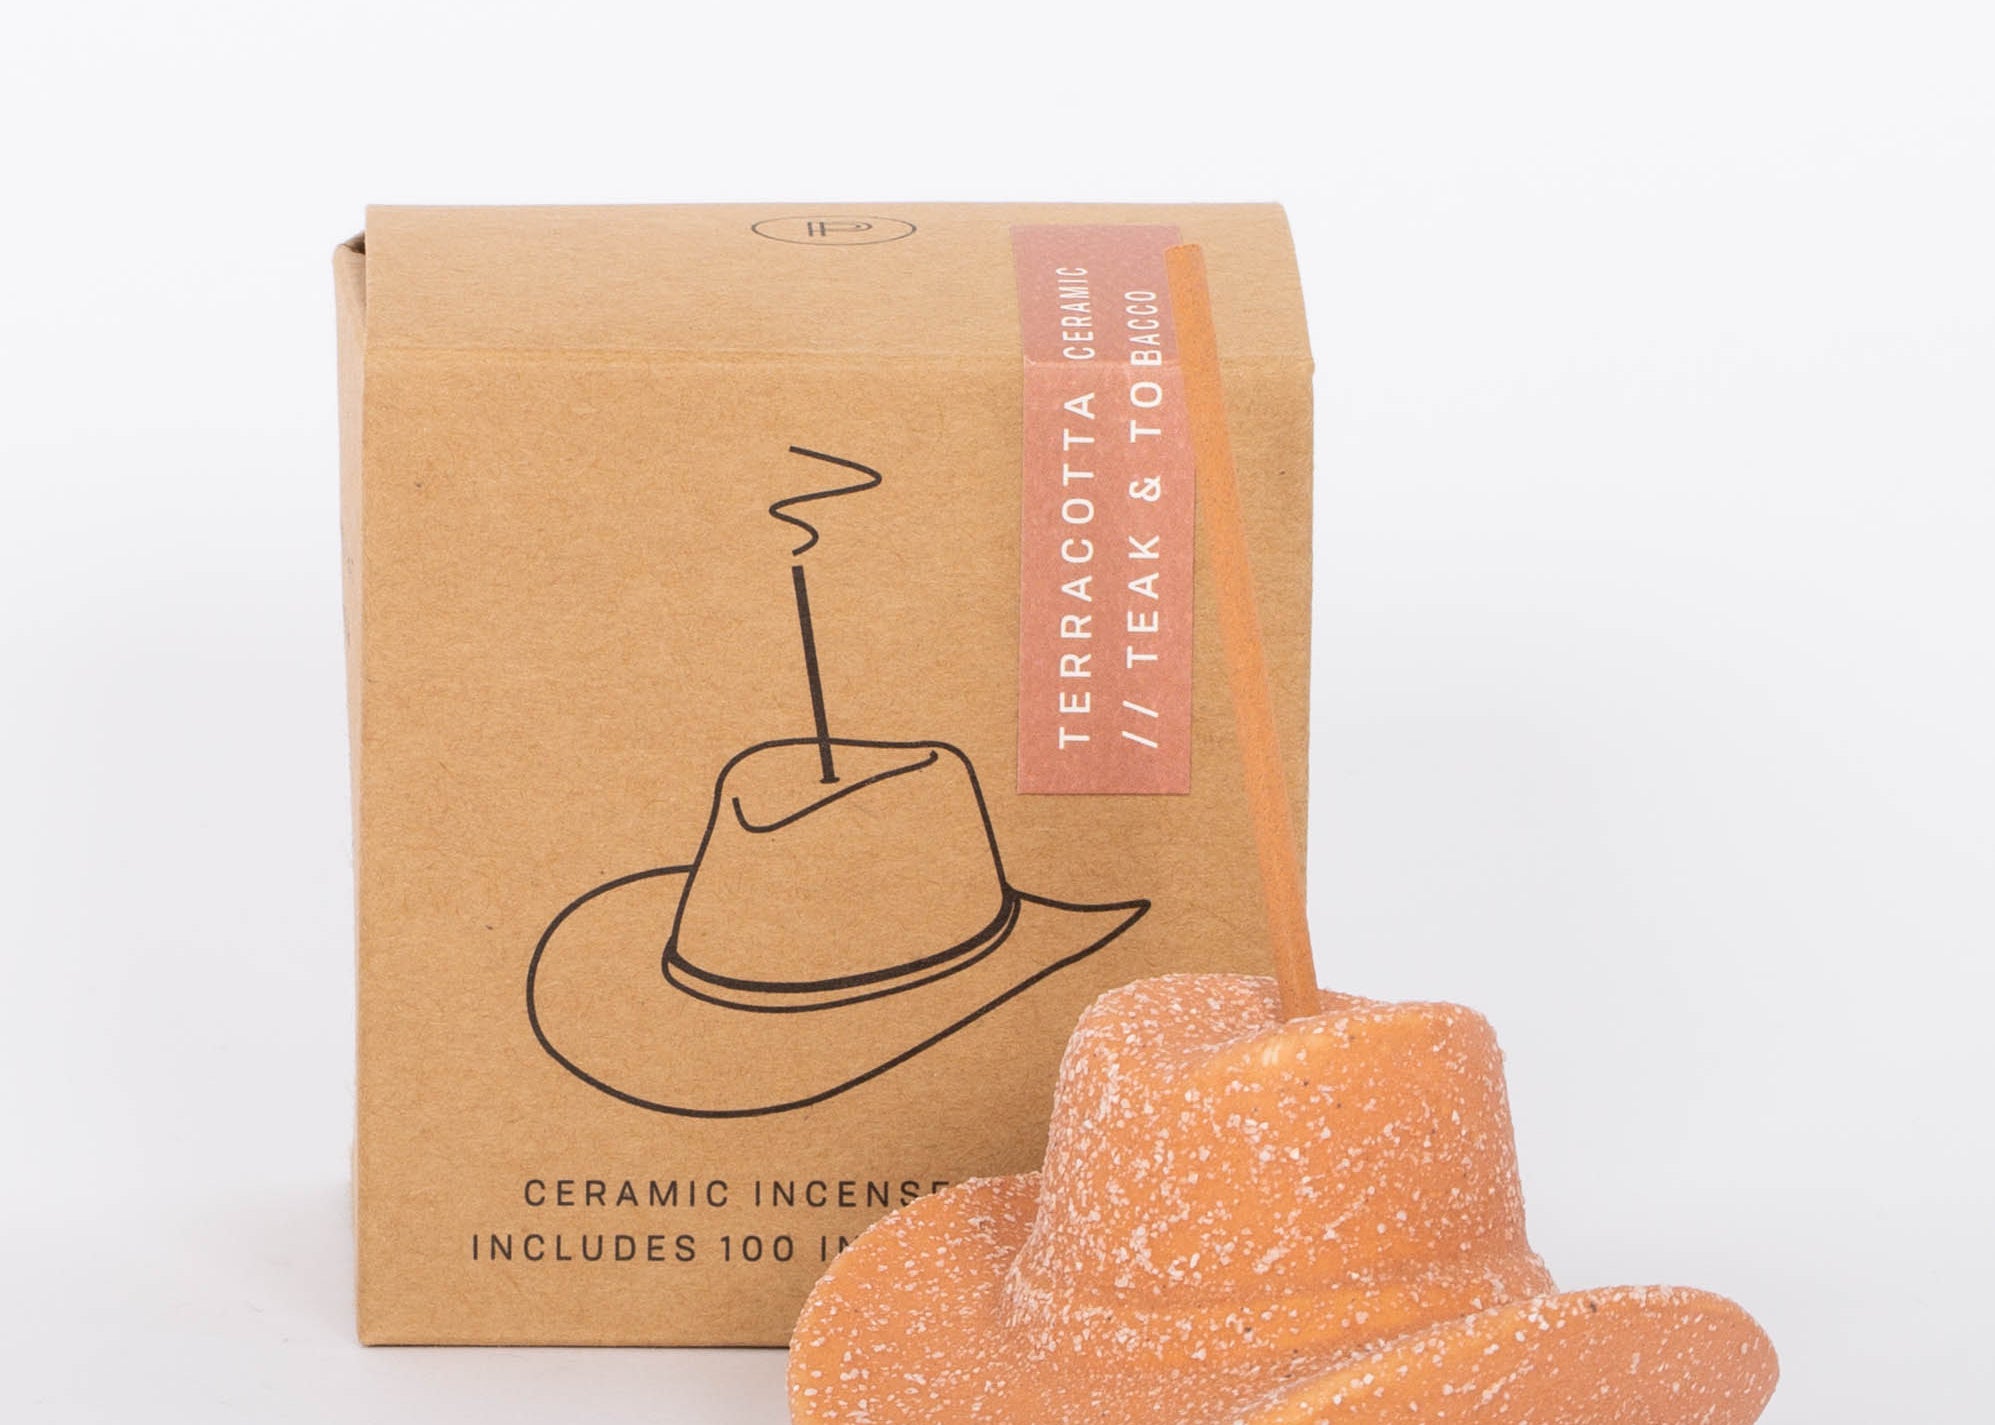 Terracotta Cowboy Hat Incense Holder This vintage-inspired incense burner is on of our favorites! Including 100 fragrant incense sticks of Palo Santo Suede, this ceramic incense holder will keep your space burning with ambiance and fragrant tones.